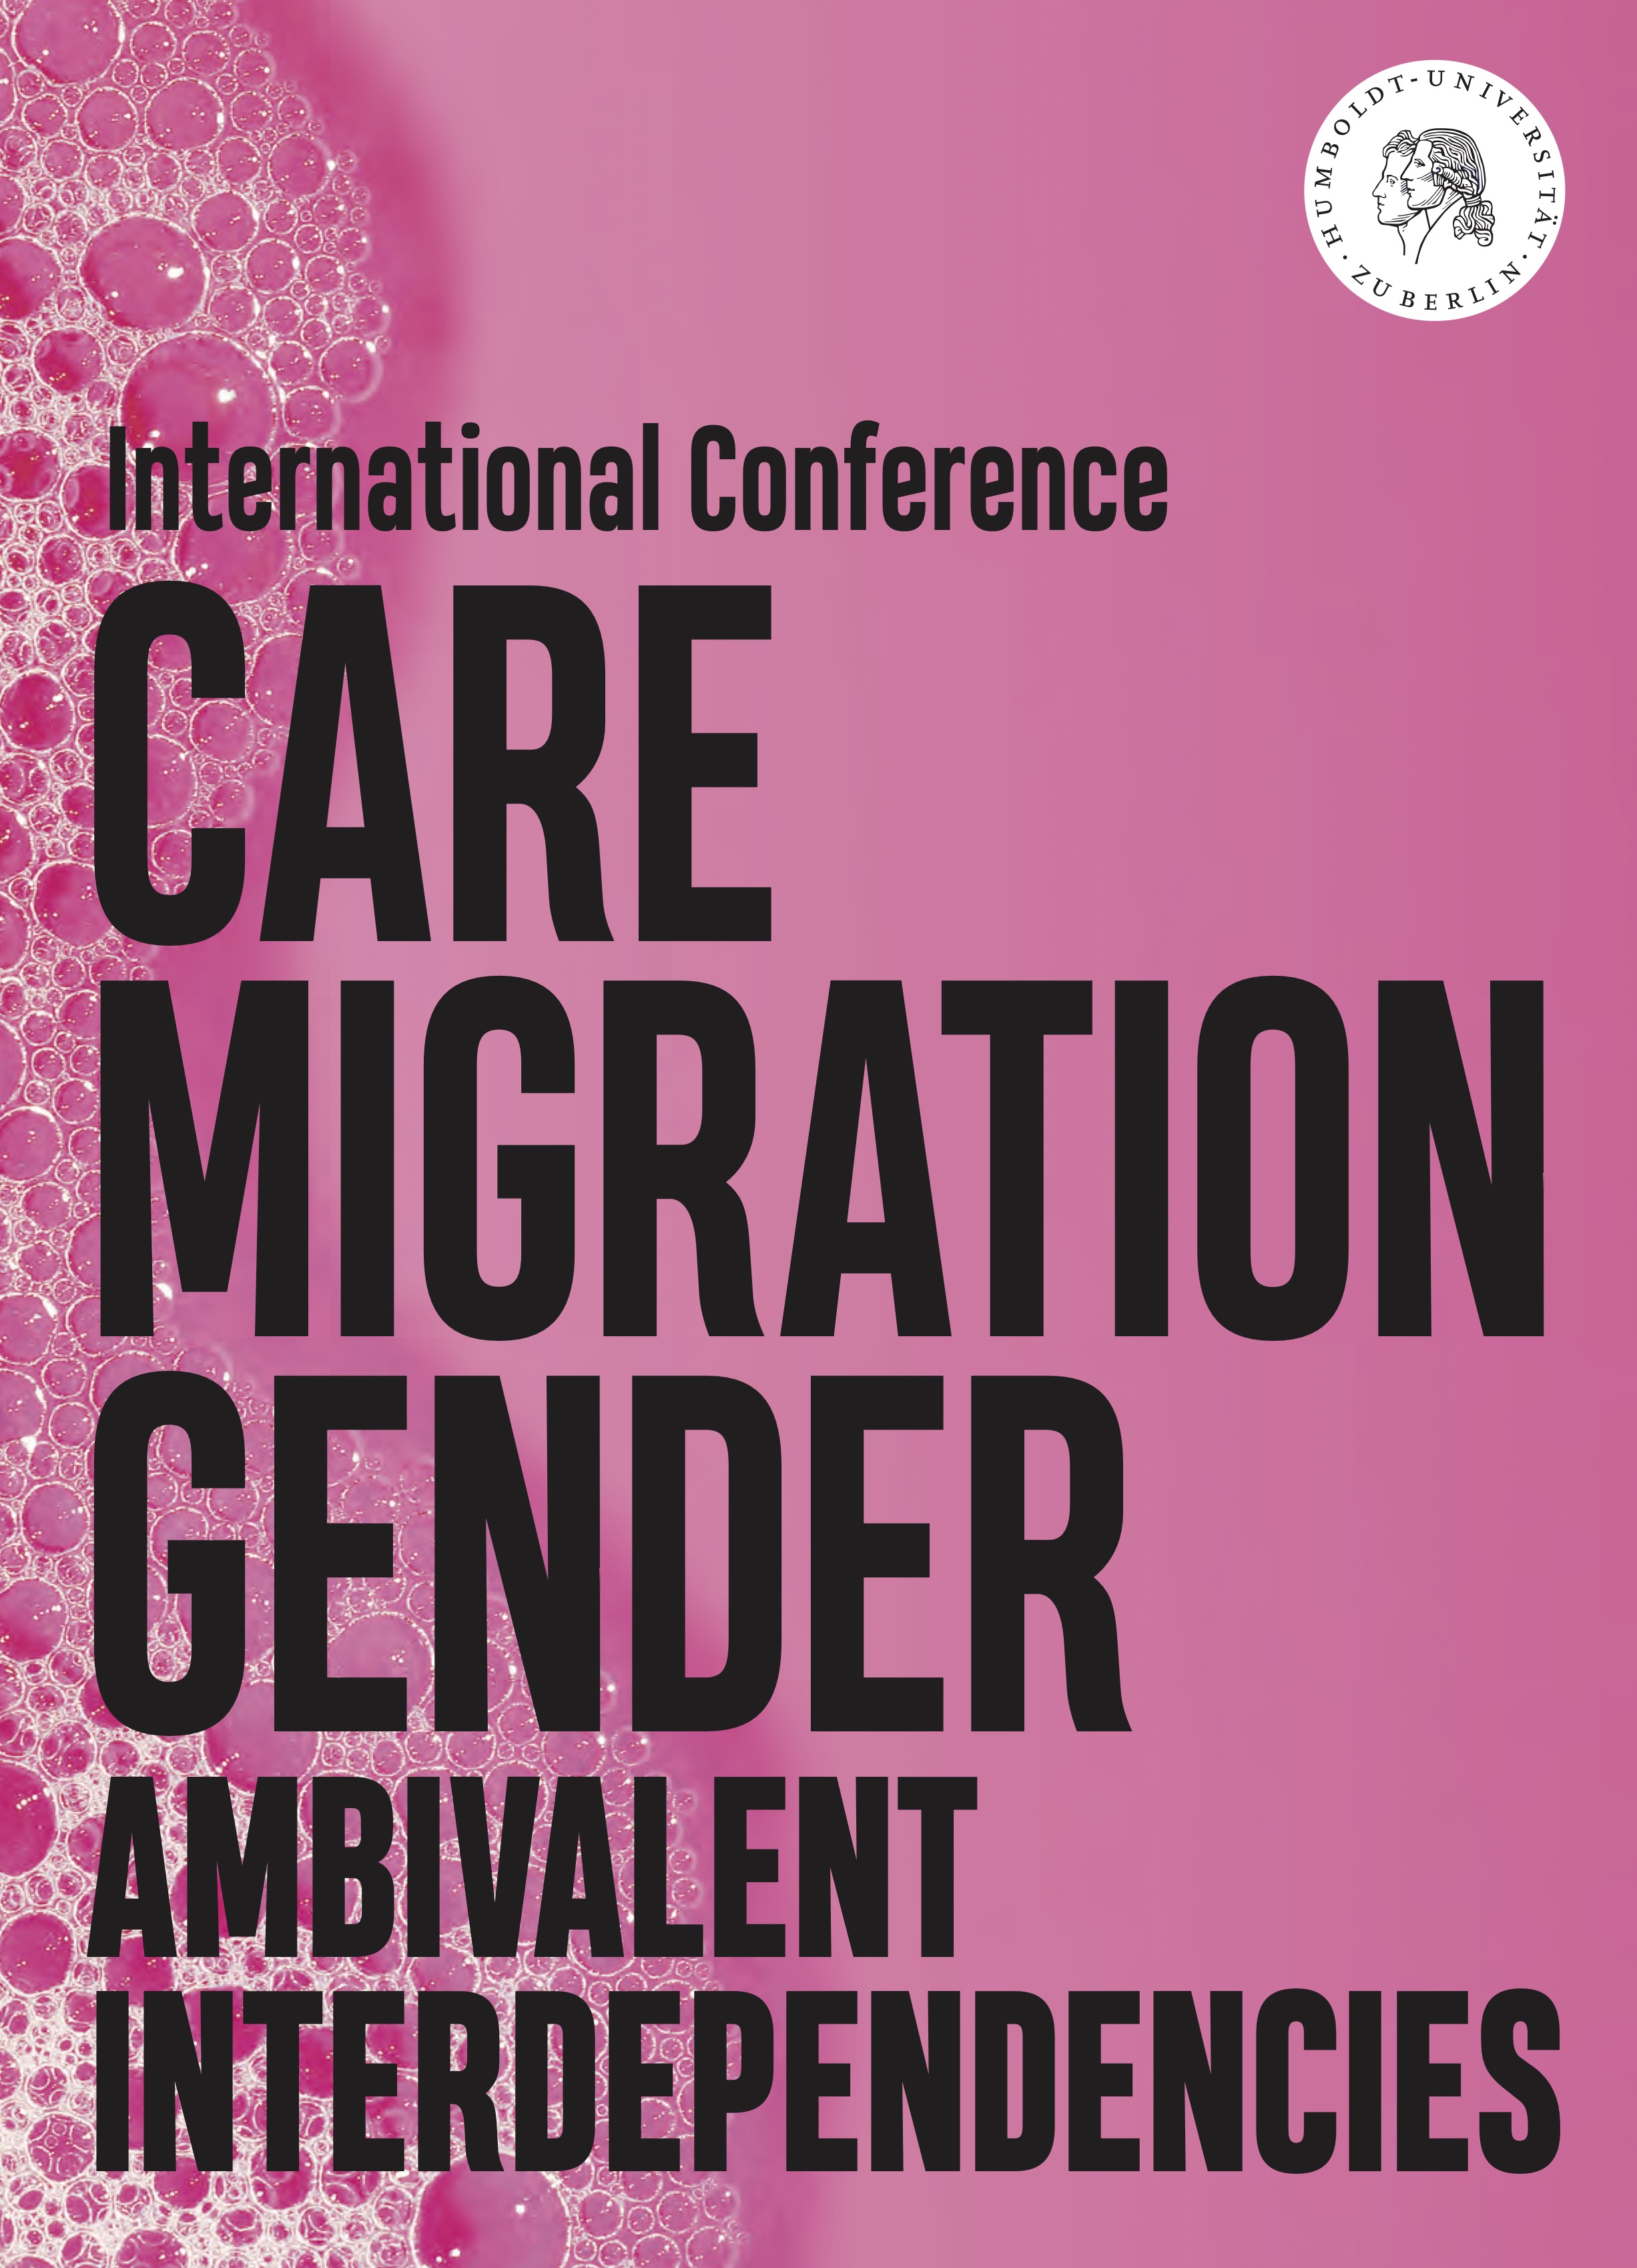 Cover art: pink background with soap bubbles; Text: International Conference Care Migration Gender Ambivalent Interdependencies; Logo HU Berlin